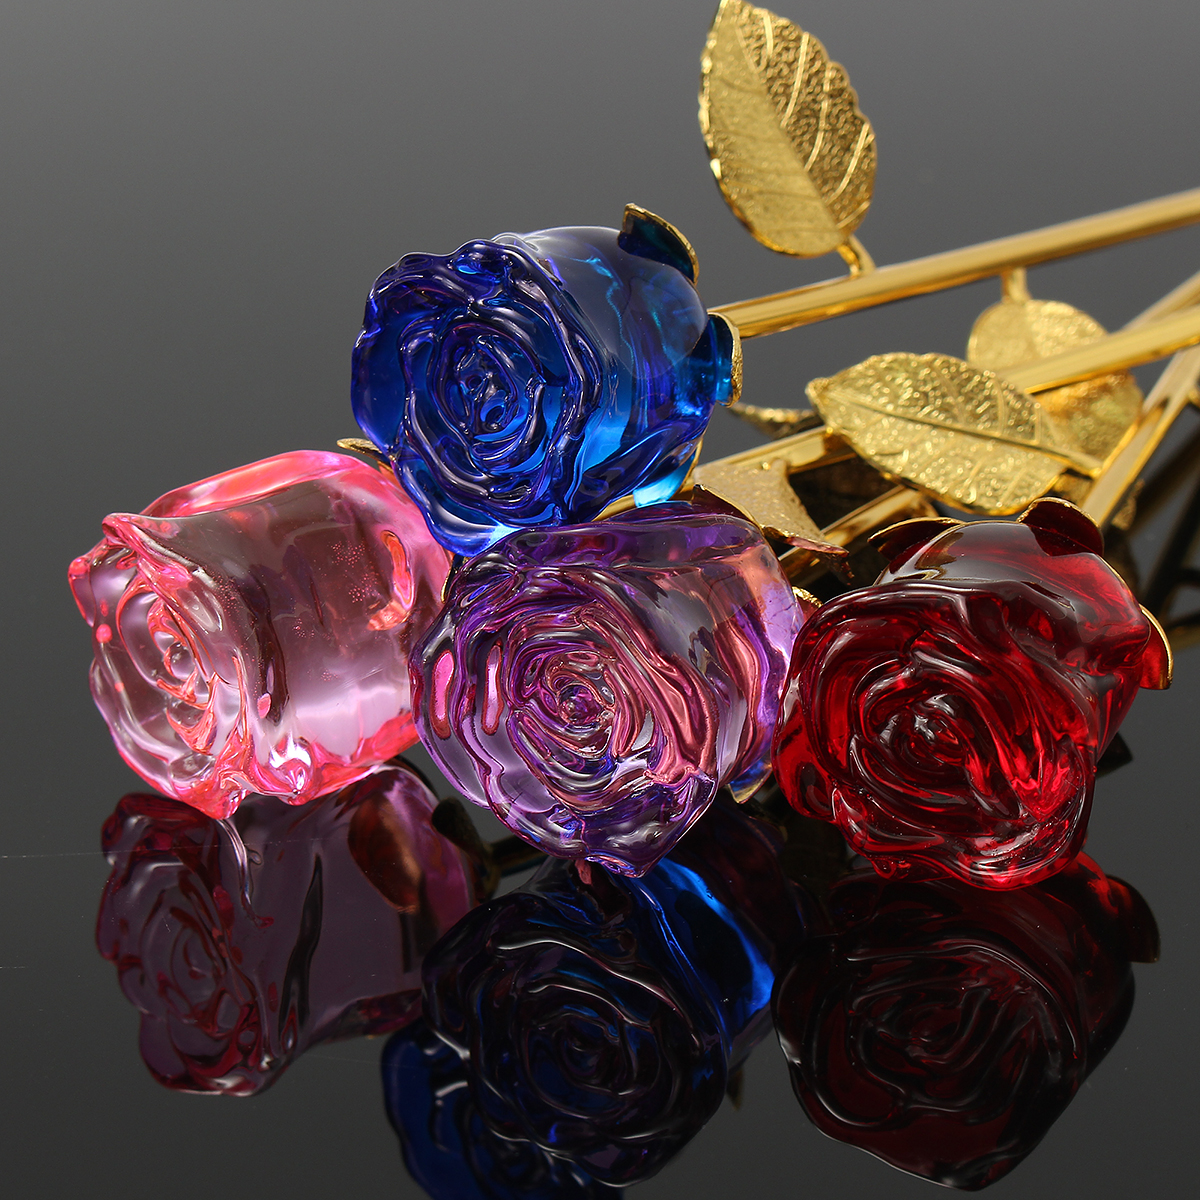 Crystal-Glass-Golden-Roses-Flower-Ornament-Valentine-Gifts-Present-with-Box-Home-Decorations-1430314-3